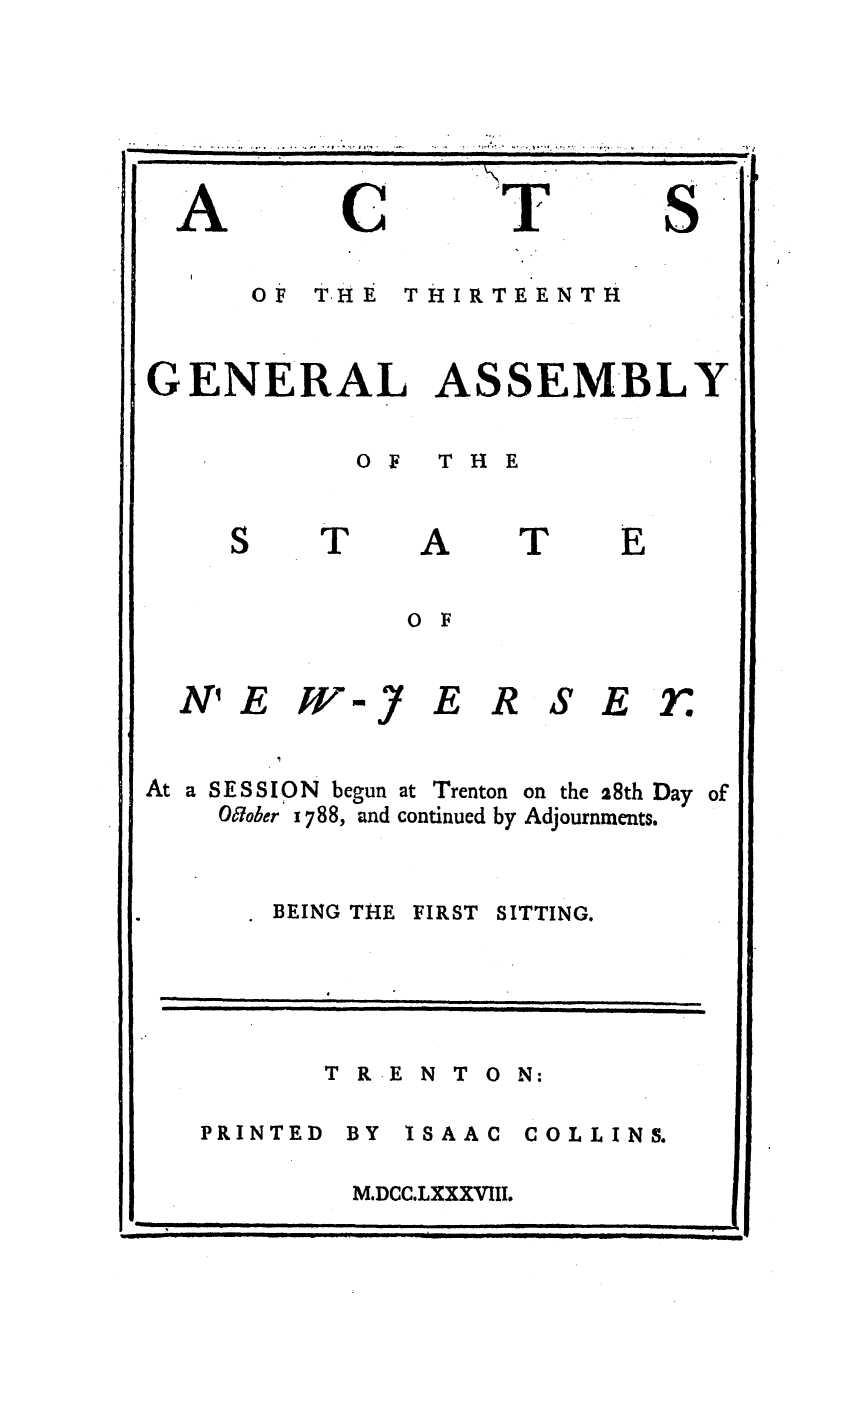 handle is hein.ssl/ssnj0249 and id is 1 raw text is: A

C

>17

S

OF  T-HE  THIRTEENTH
GENERAL ASSEMBLY
OF  THE

T

A

T

0 F

N' E W/-J

ERSEfr

At a SESSION begun at Trenton
O7ober 1788, and continued by

BEING THE

on the 28th Day
Adjournments.

FIRST SITTING.

T R E N T O N:

PRINTED BY

ISAAC  COLLINS.

M.DCC.LXXXVIII.

--   i ii  I  Il   II]I  I  i     n  nl  Ii

                                                                  , .
II                 I I IIIl l   i   II          I              I II                  I     I                                                                      I
I                                               i  i  i           i           ill                                          i                           -              -             ii      |.    i    n    |  ii  i   i

I                                                      I  I                                II I                                  I   I                       I           I       II I I                                I IIII  _                 I                                       i
I                 I  _         i           I           I                 I  I  III           I   I                                       I        I    I                                           l       I                  IIIII


